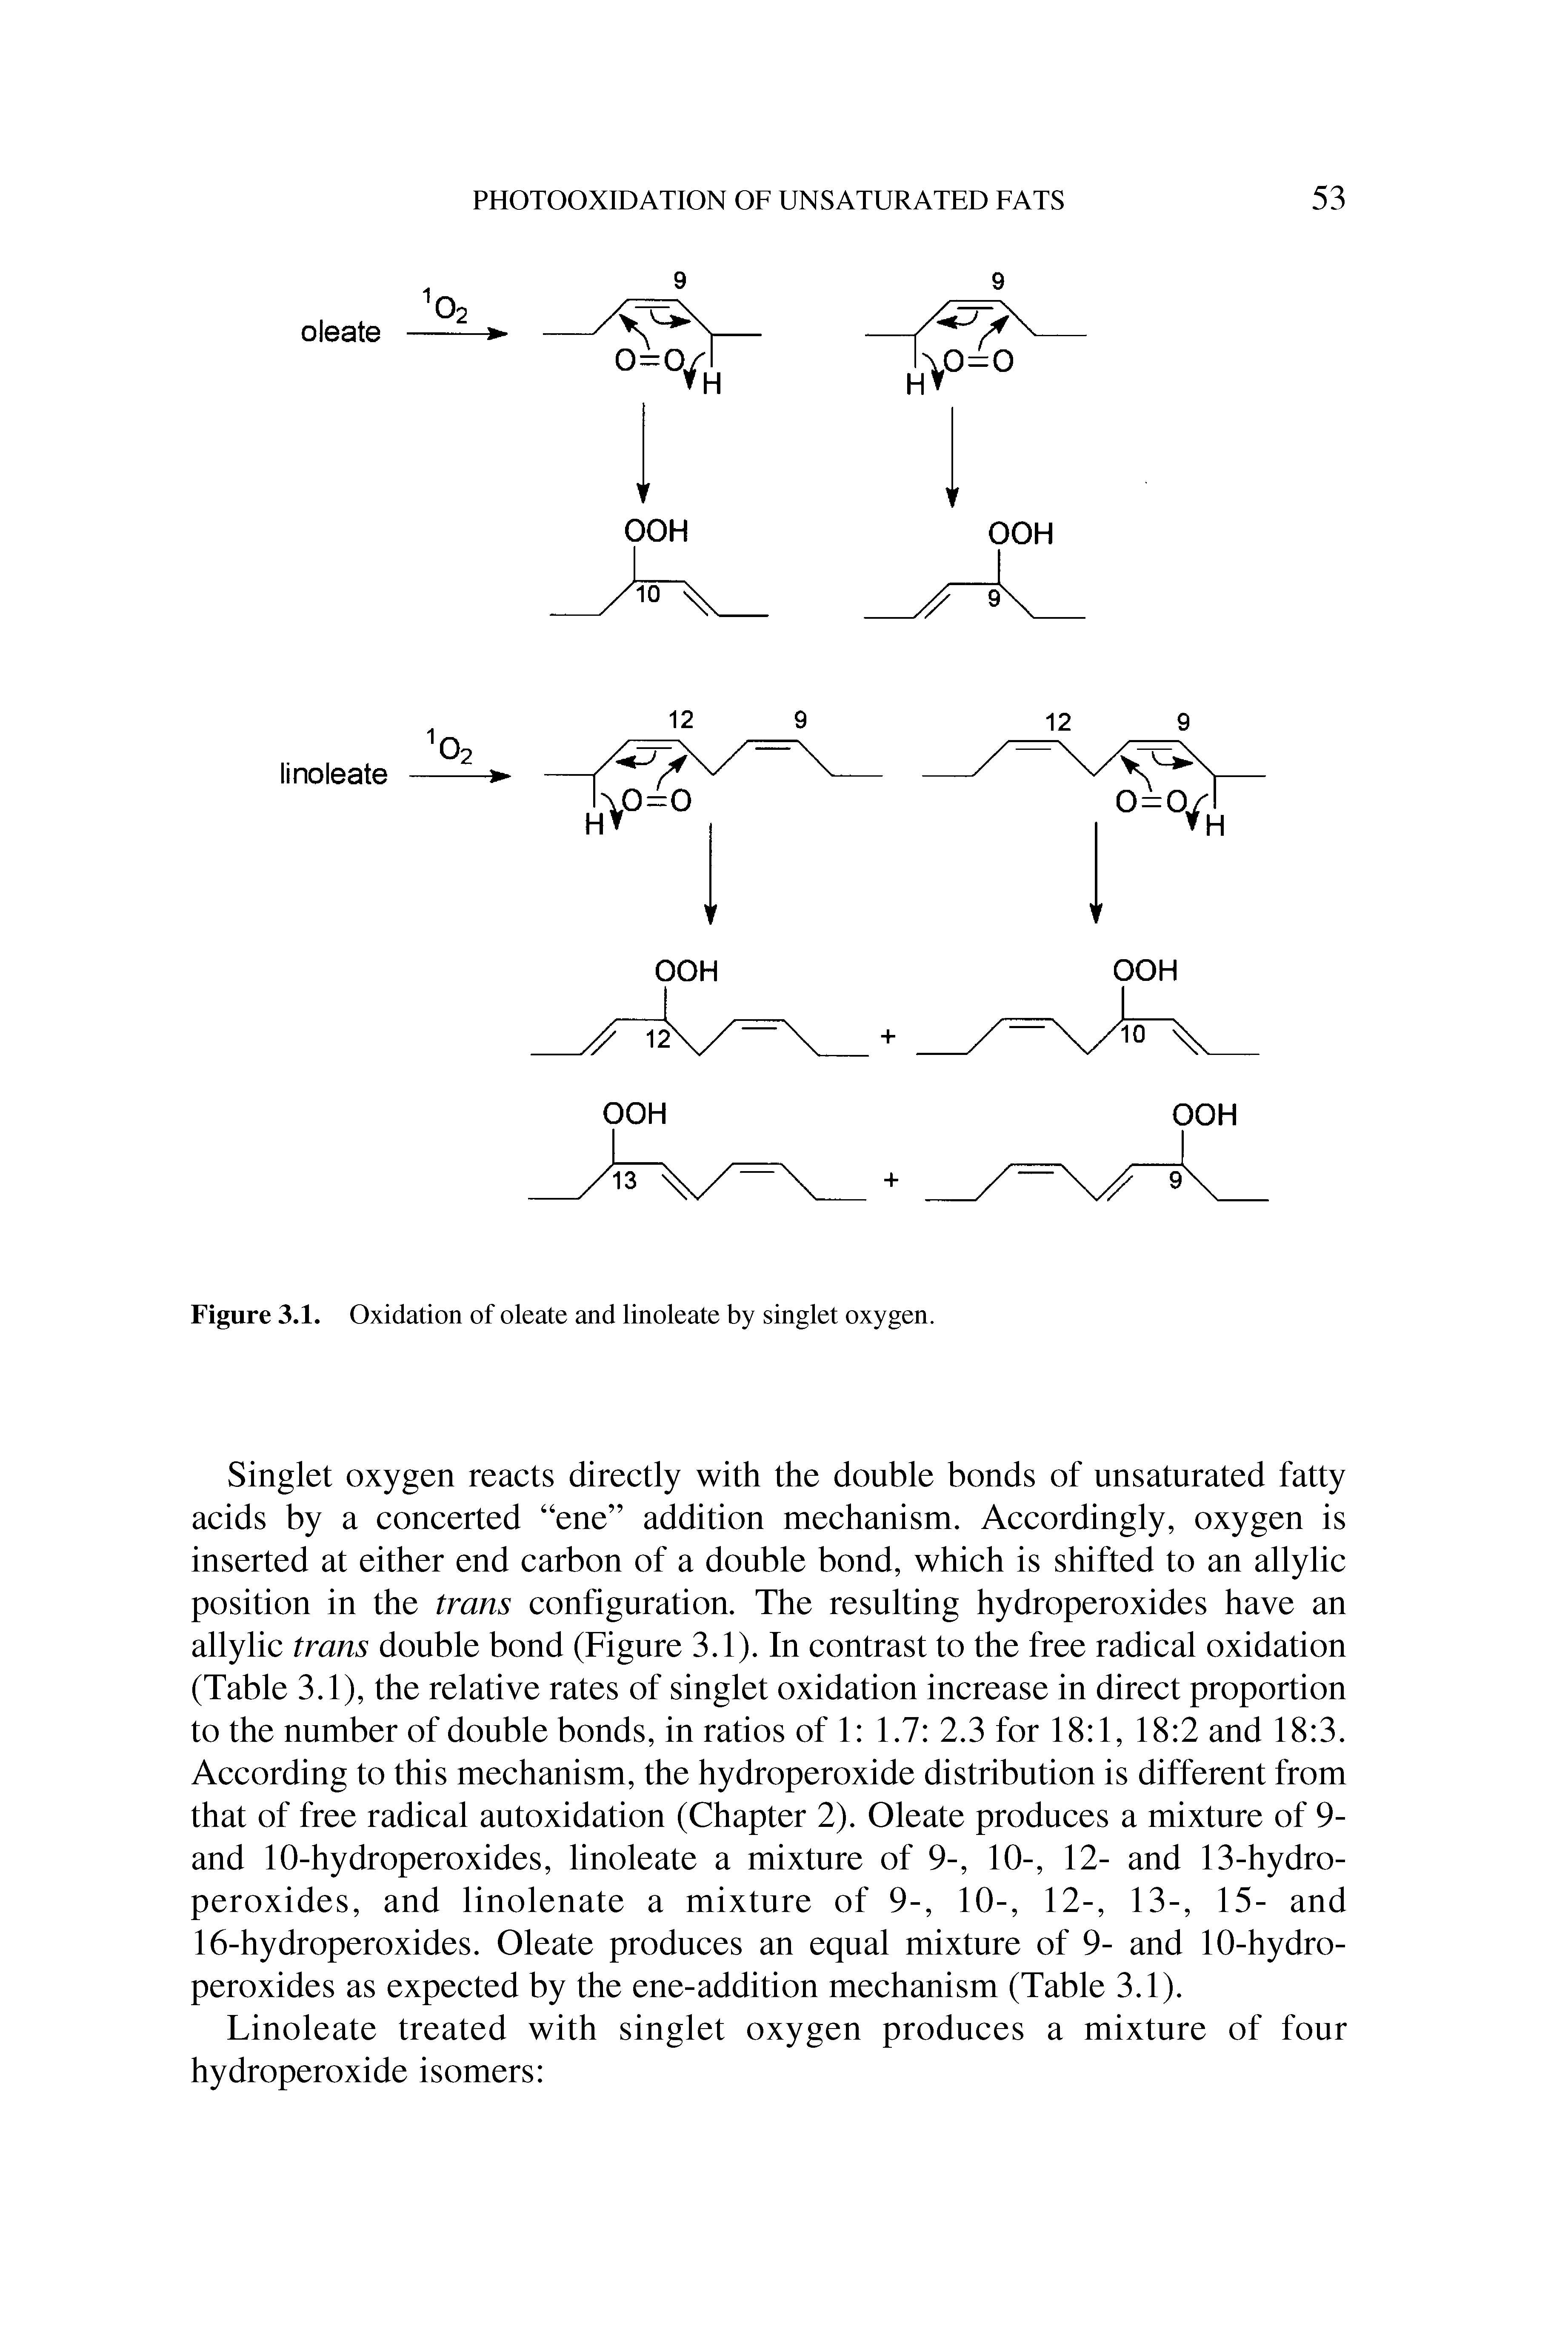 Figure 3.1. Oxidation of oleate and linoleate by singlet oxygen.